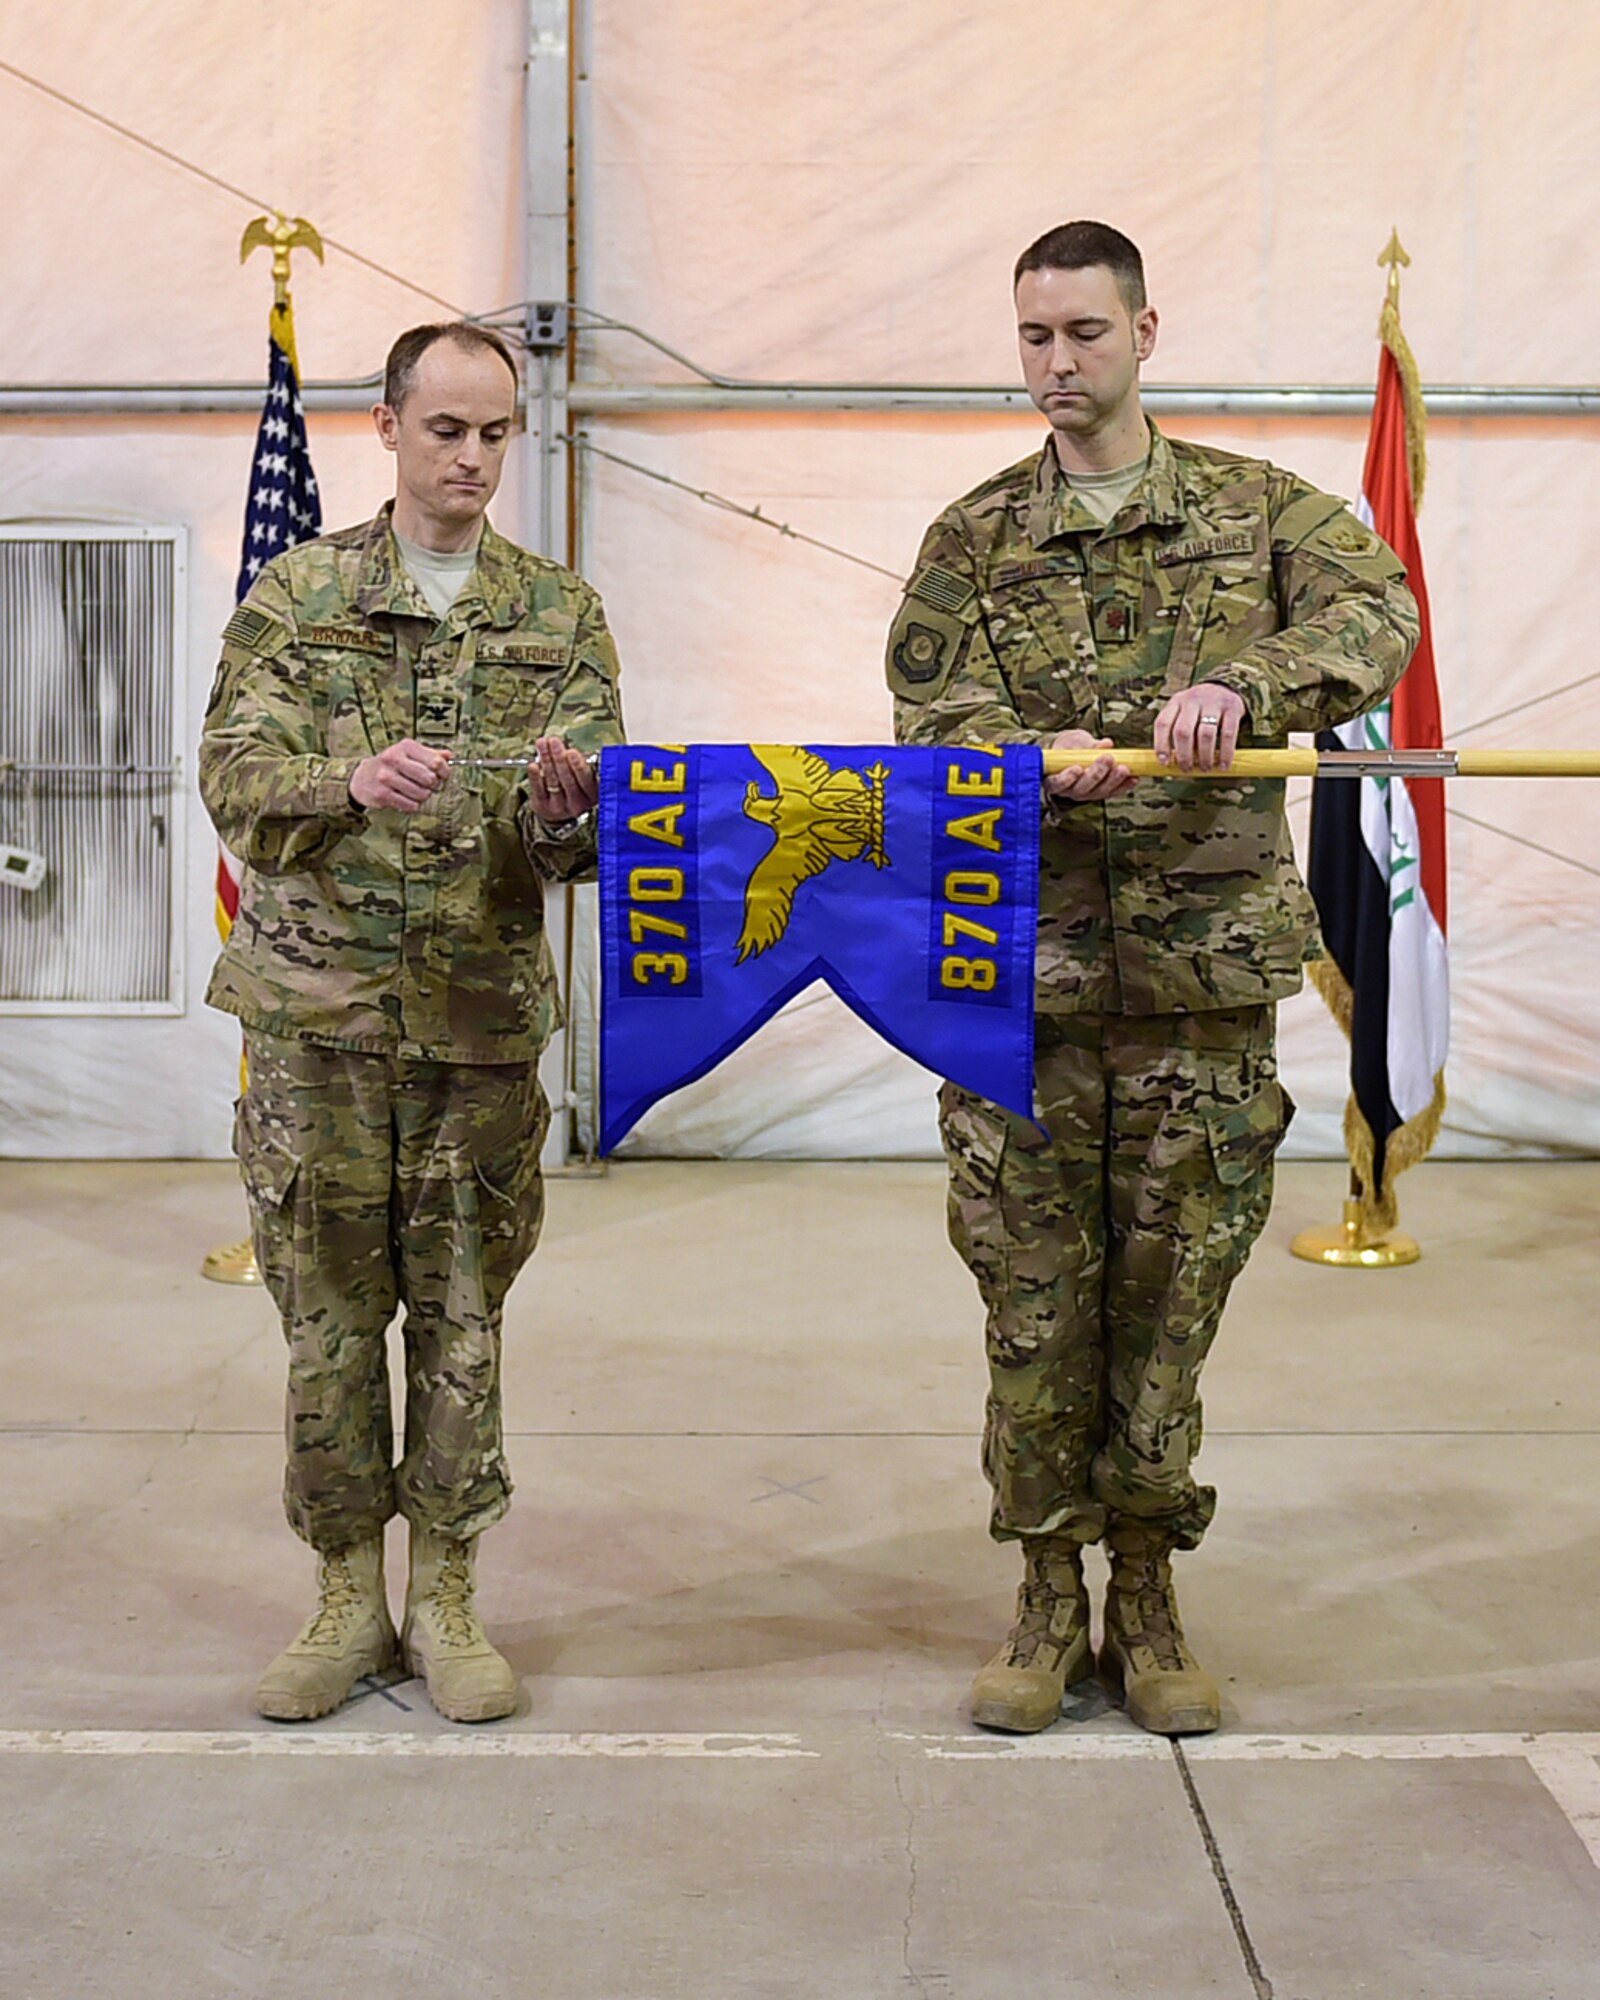 Col. Bradley Bridges, 370th Air Expeditionary Advisory Group commander, and Maj. Ross “Alex” Mol, 870th Air Expeditionary Advisory Squadron commander, unveil the 870th AEAS guidon during a unit activation ceremony Jan. 9, 2016 in Baghdad, Iraq. The 870th AEAS provides direct support to the Iraqi Air Force through logistics advise and assist missions, and commands all aerial ports in Iraq. (U.S. Air Force photo by Staff Sgt. Jerilyn Quintanilla)
